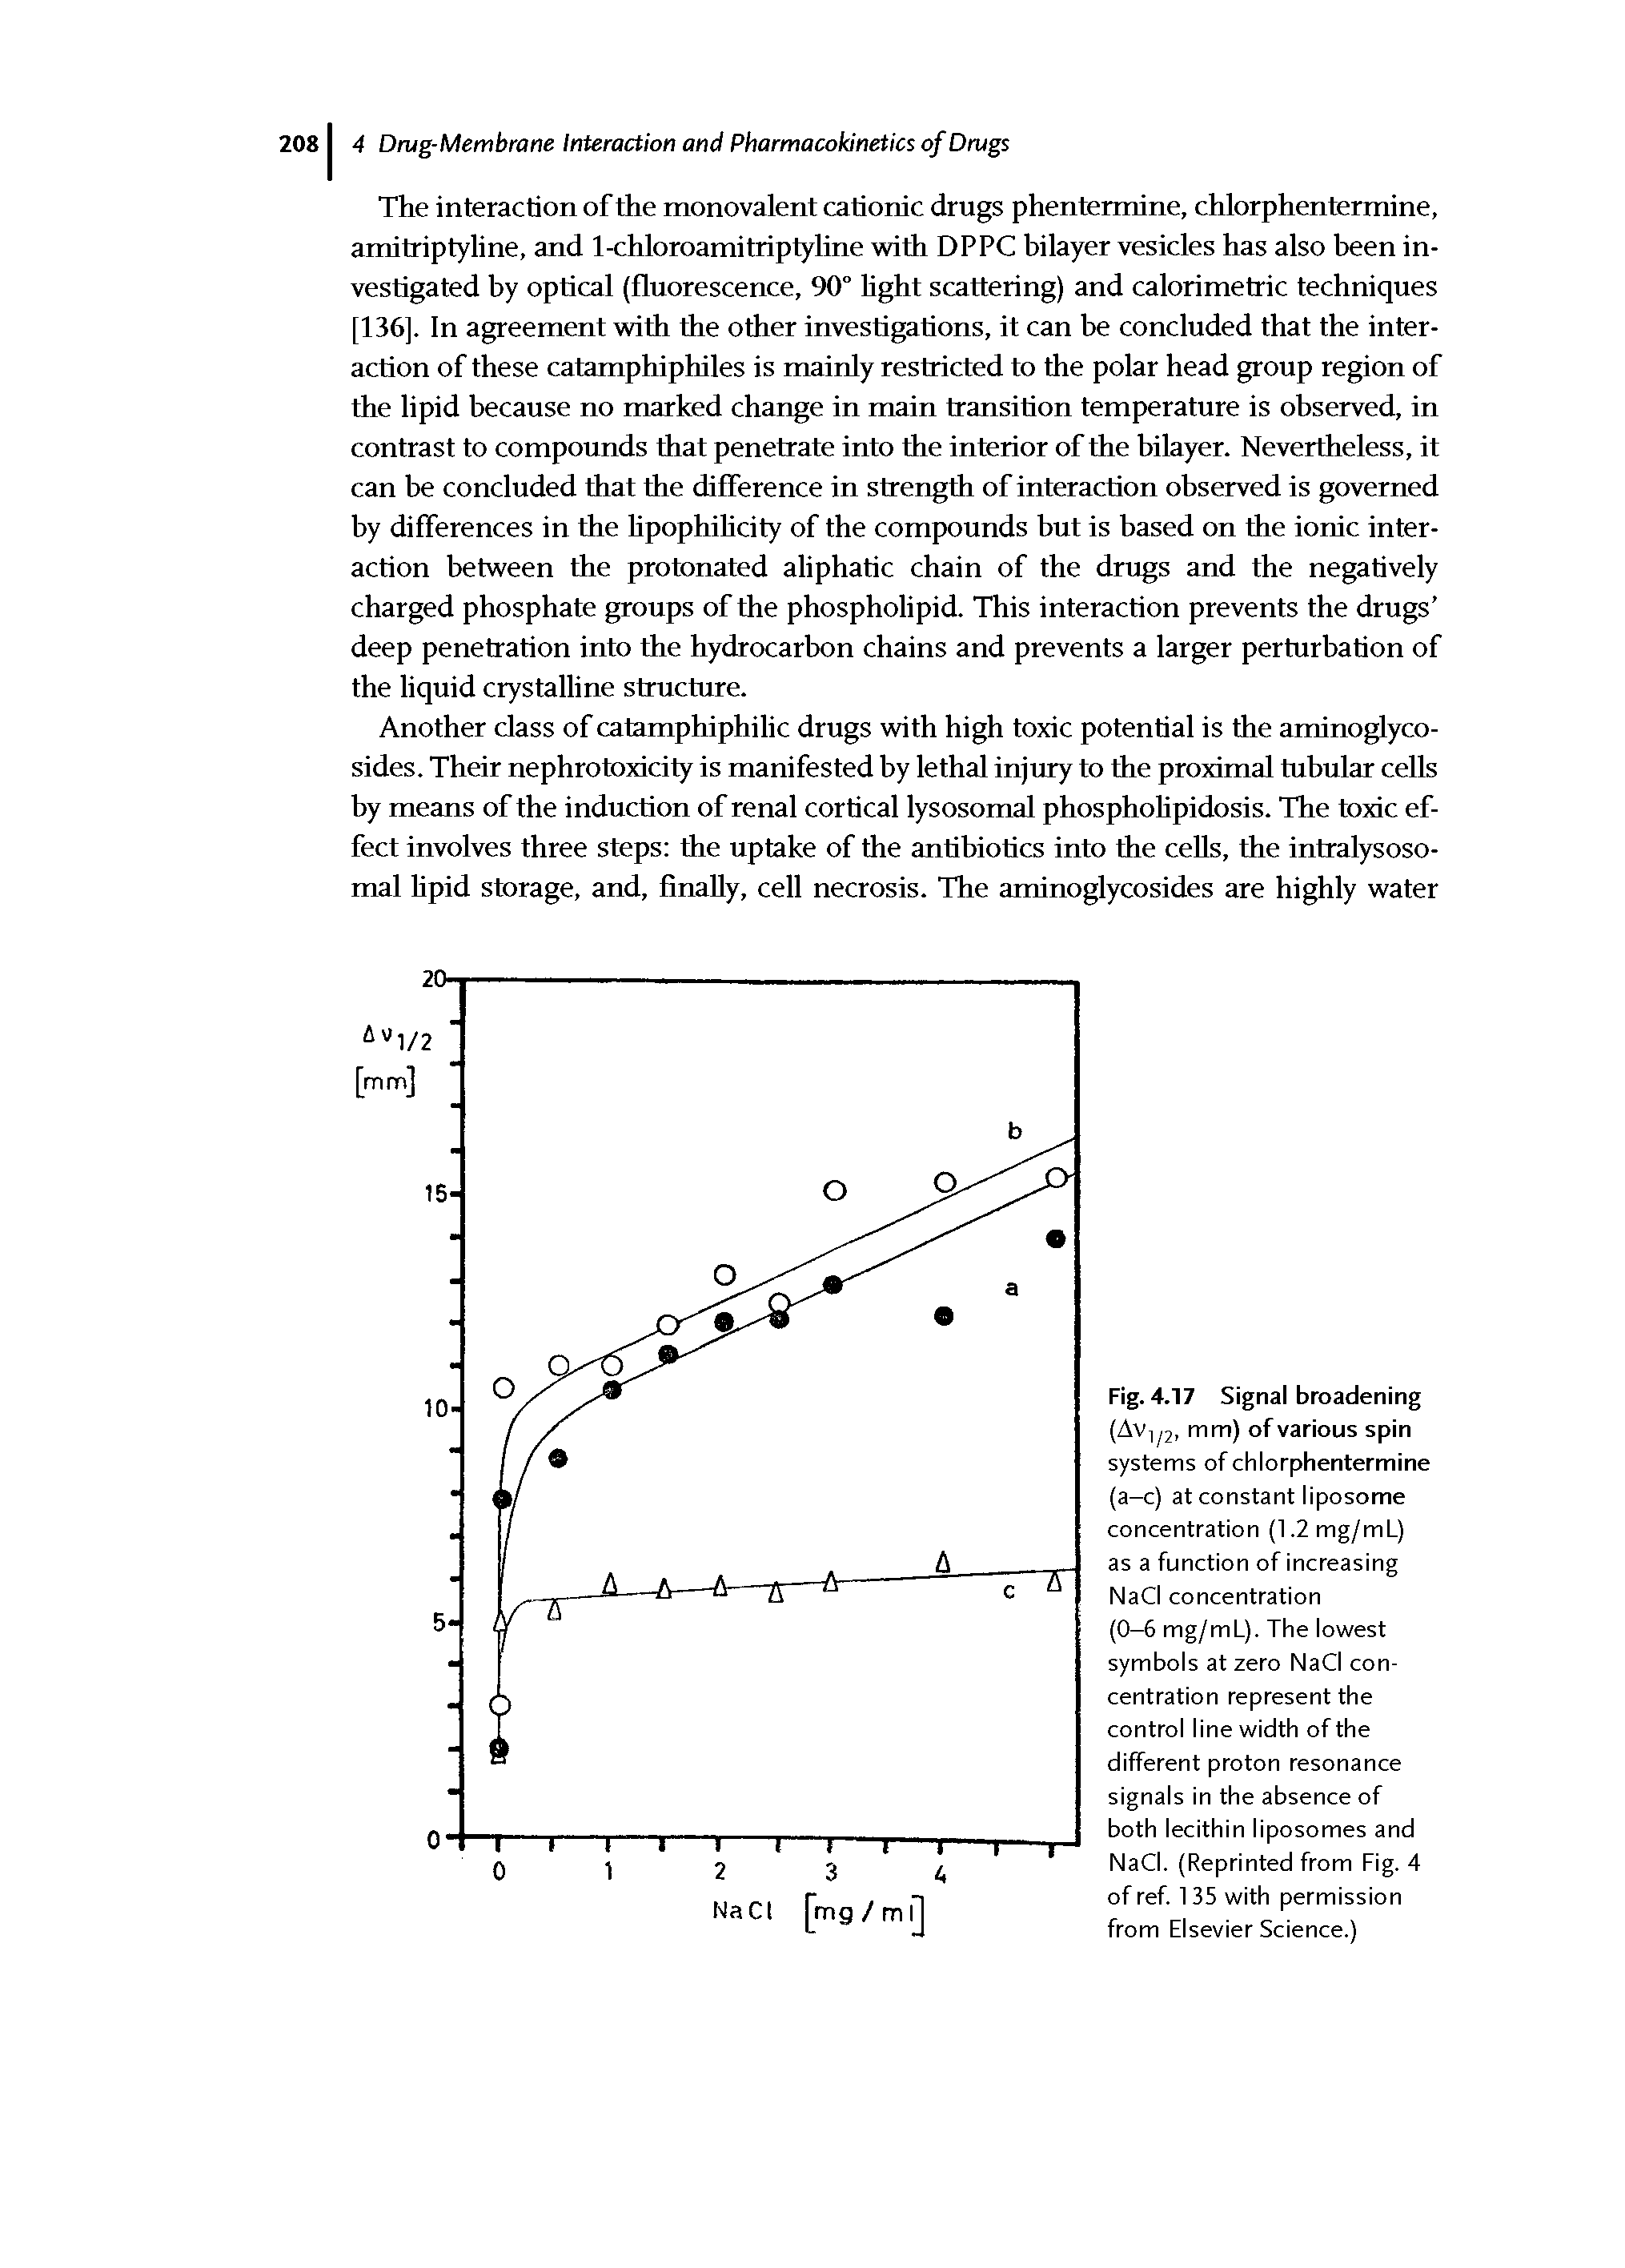 Fig. 4.17 Signal broadening (Avlj/2, mm) of various spin systems of chlorphentermine (a-c) at constant liposome concentration (1.2mg/mL) as a function of increasing NaCI concentration (0-6 mg/mL). The lowest symbols at zero NaCI concentration represent the control line width of the different proton resonance signals in the absence of both lecithin liposomes and NaCI. (Reprinted from Fig. 4 of ref. 135 with permission from Elsevier Science.)...